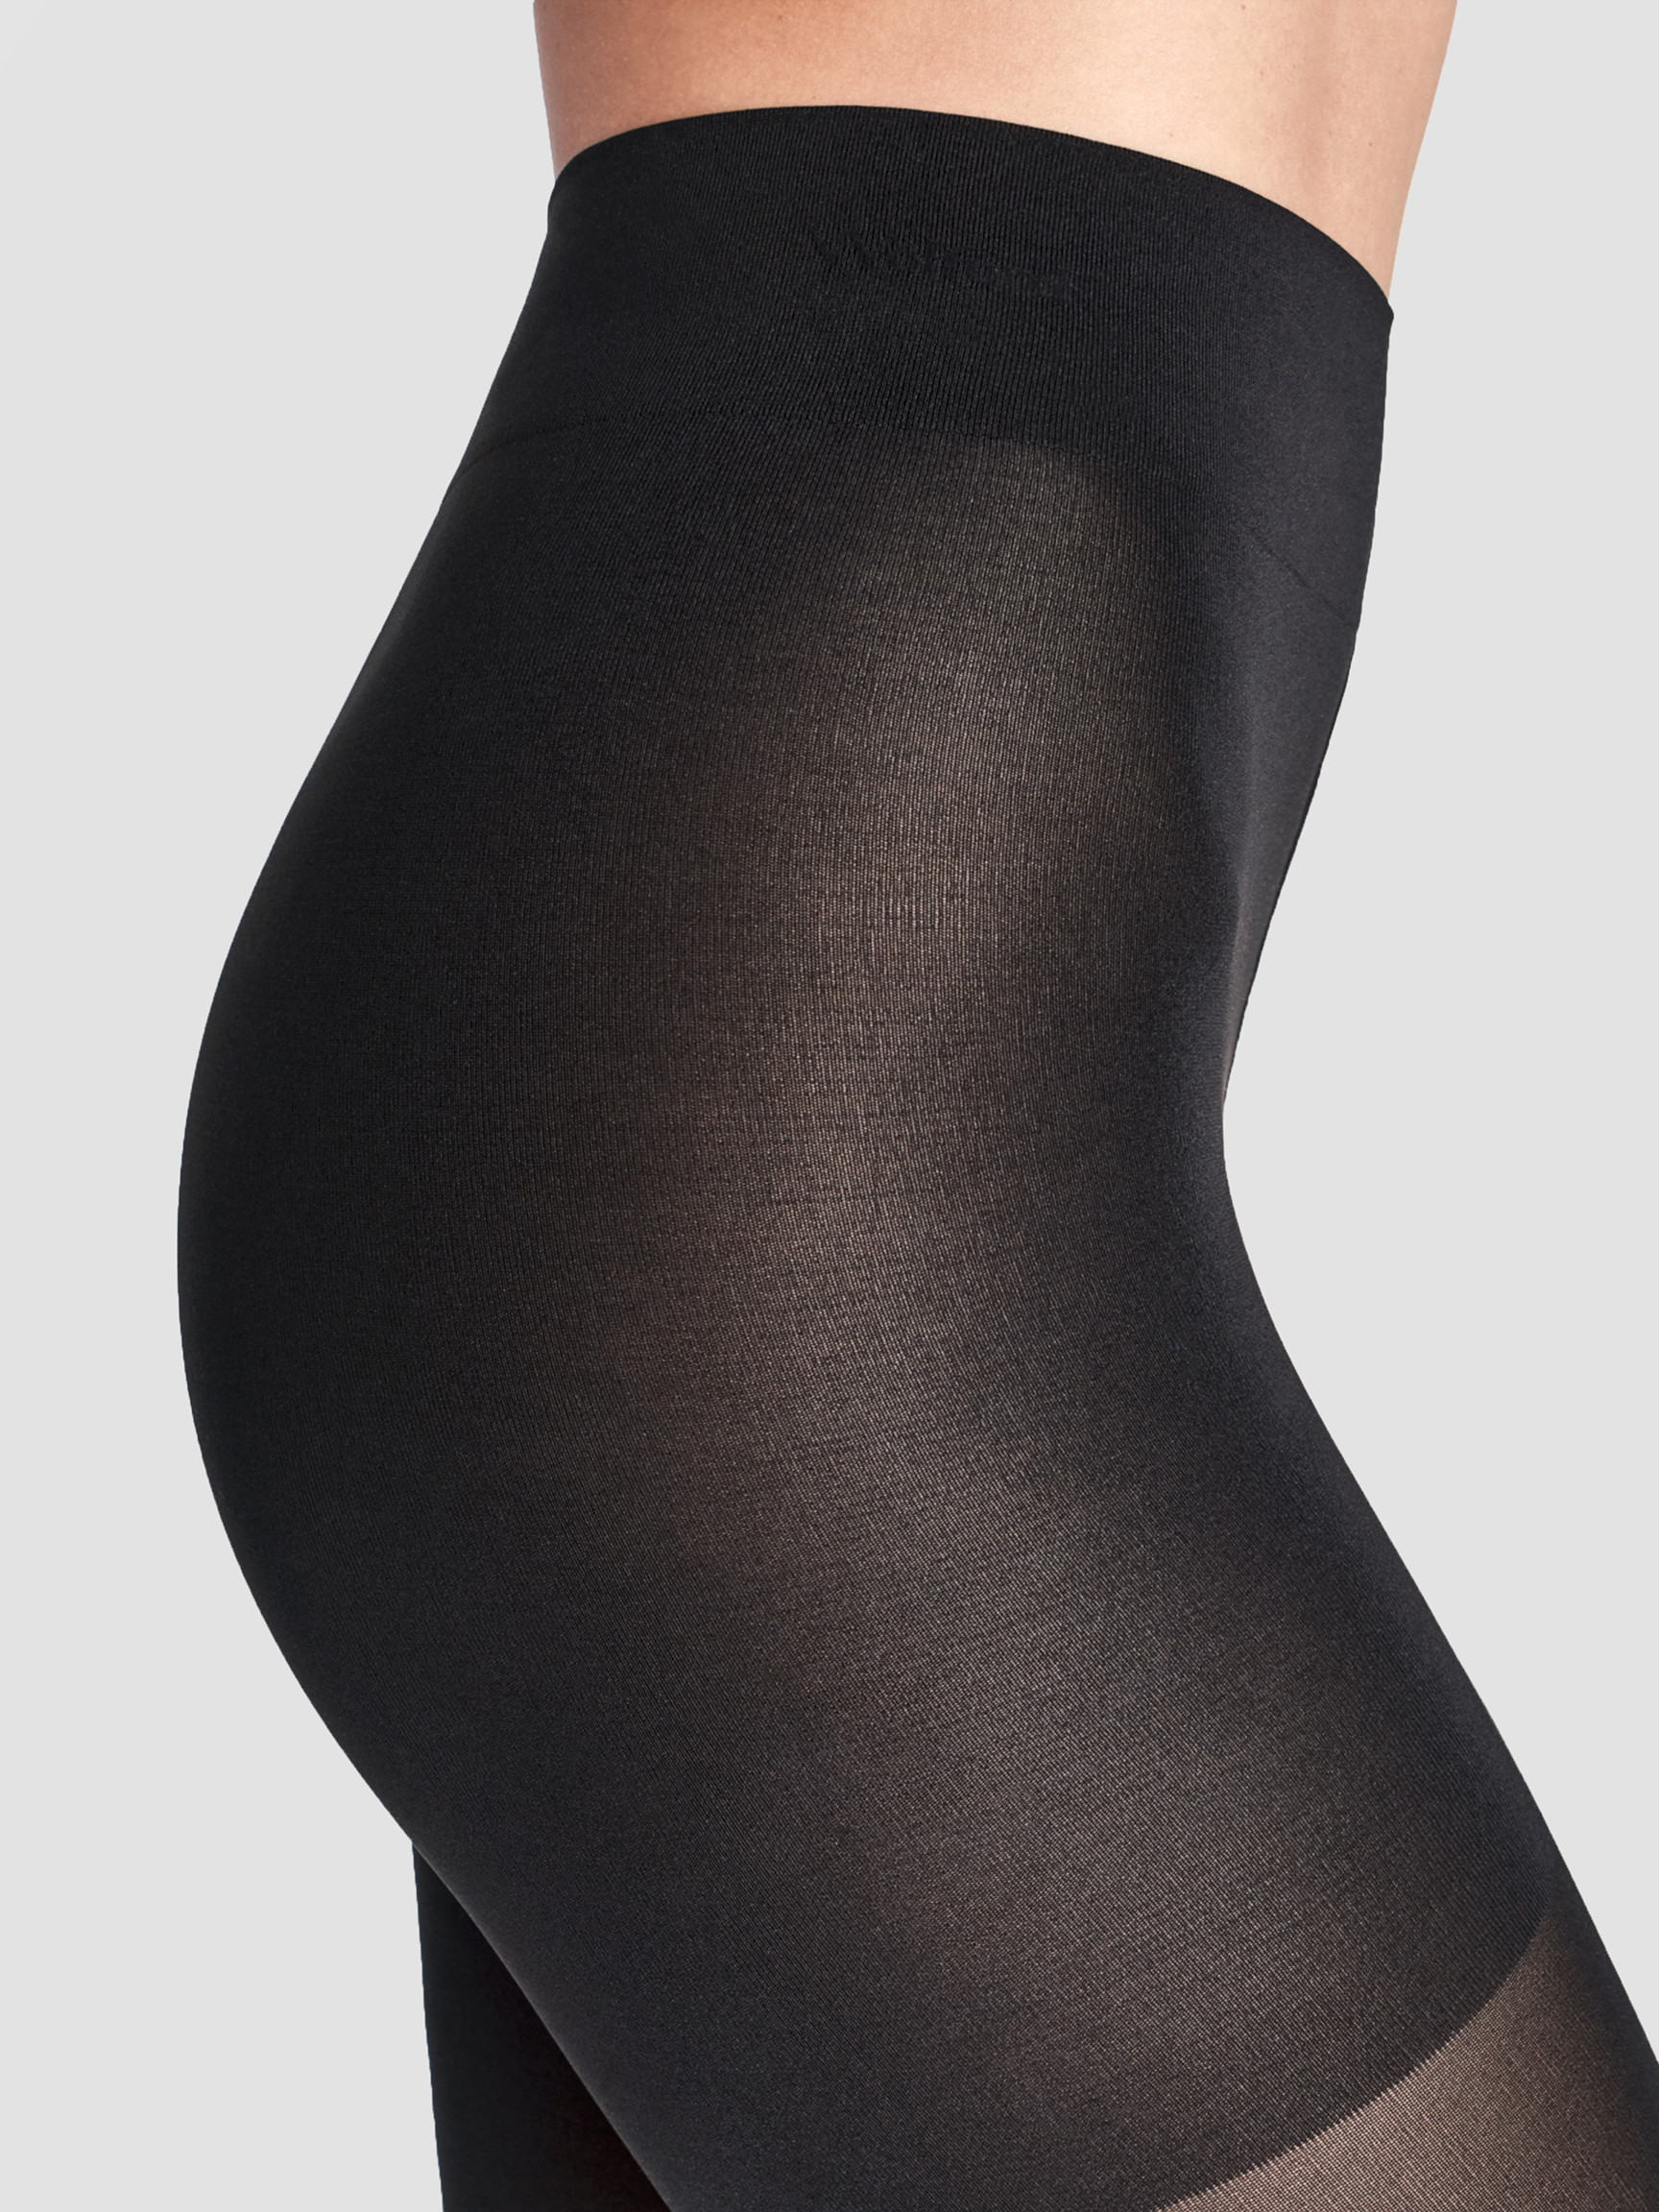 Wolford Opaque 70 Denier Tights For Women Comfort Hosiery for